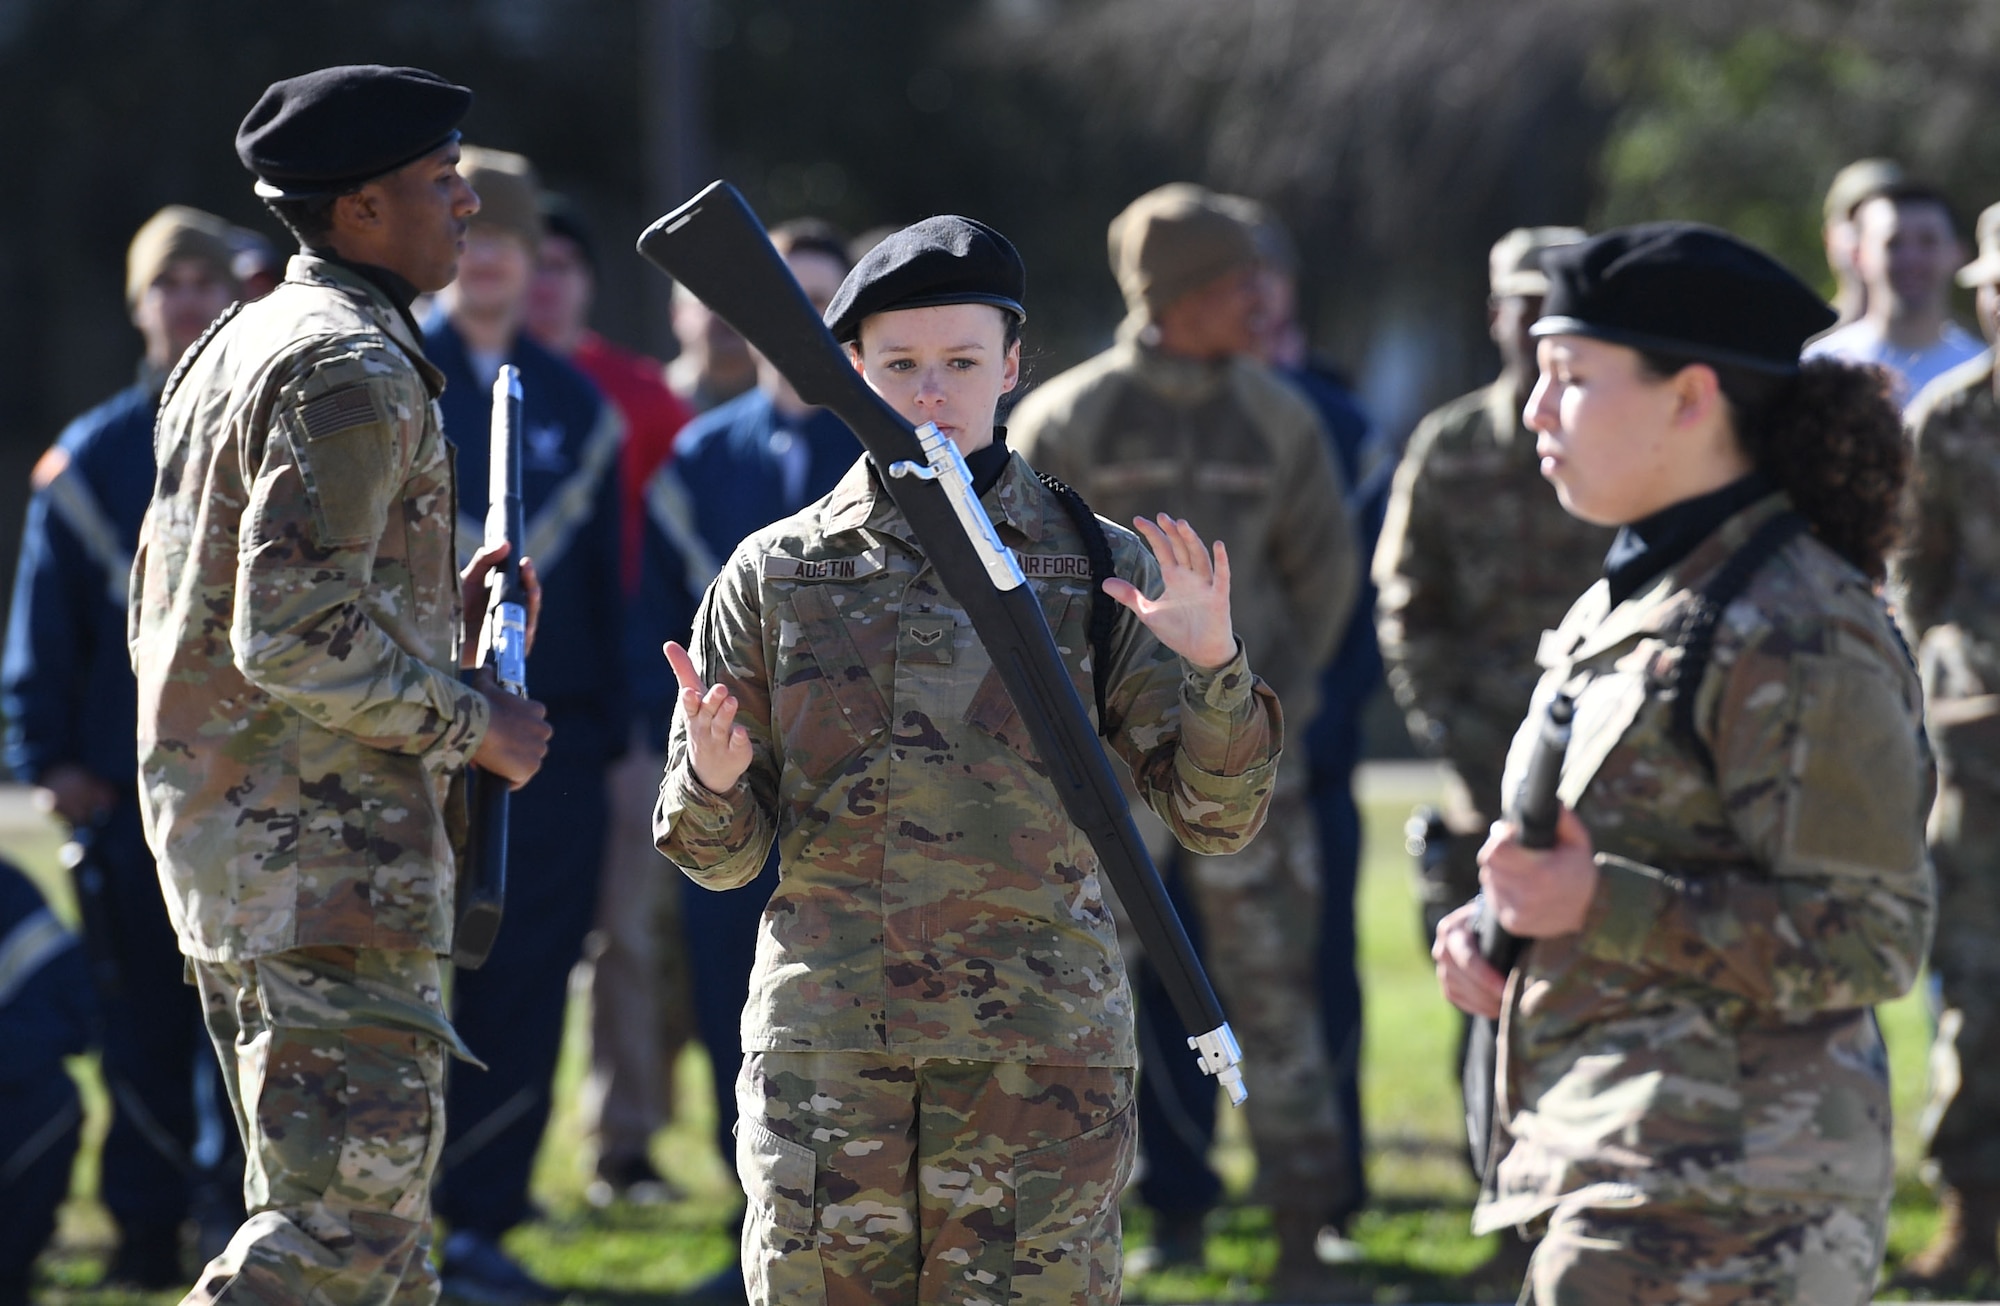 Members of the 334th Training Squadron freestyle drill team perform during the 81st Training Group drill down on the Levitow Training Support Facility drill pad at Keesler Air Force Base, Mississippi, Feb. 23, 2023.